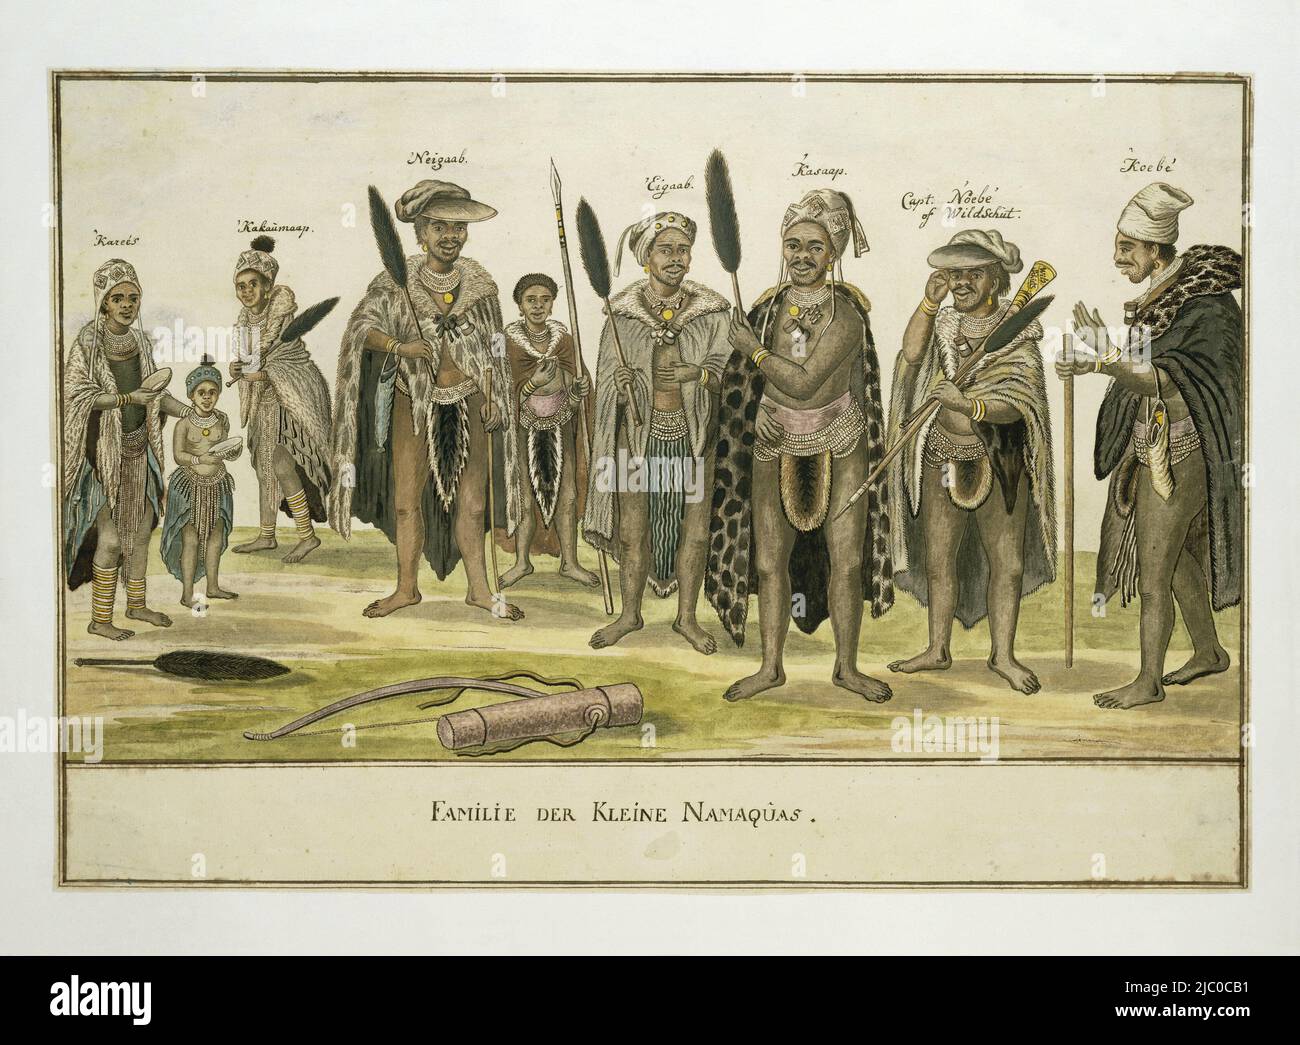 Family of little Namaquas, with chief Captein Ñoébe, named Wildschut, Chieftans of the Namaqualand region, draughtsman: Robert Jacob Gordon, Kaapprovincie, c. Jul-1779 - Aug-1779, paper, brush, pen, h 660 mm × w 480 mm, h 360 mm × w 524 mm, h 294 mm × w 515 mm Stock Photo